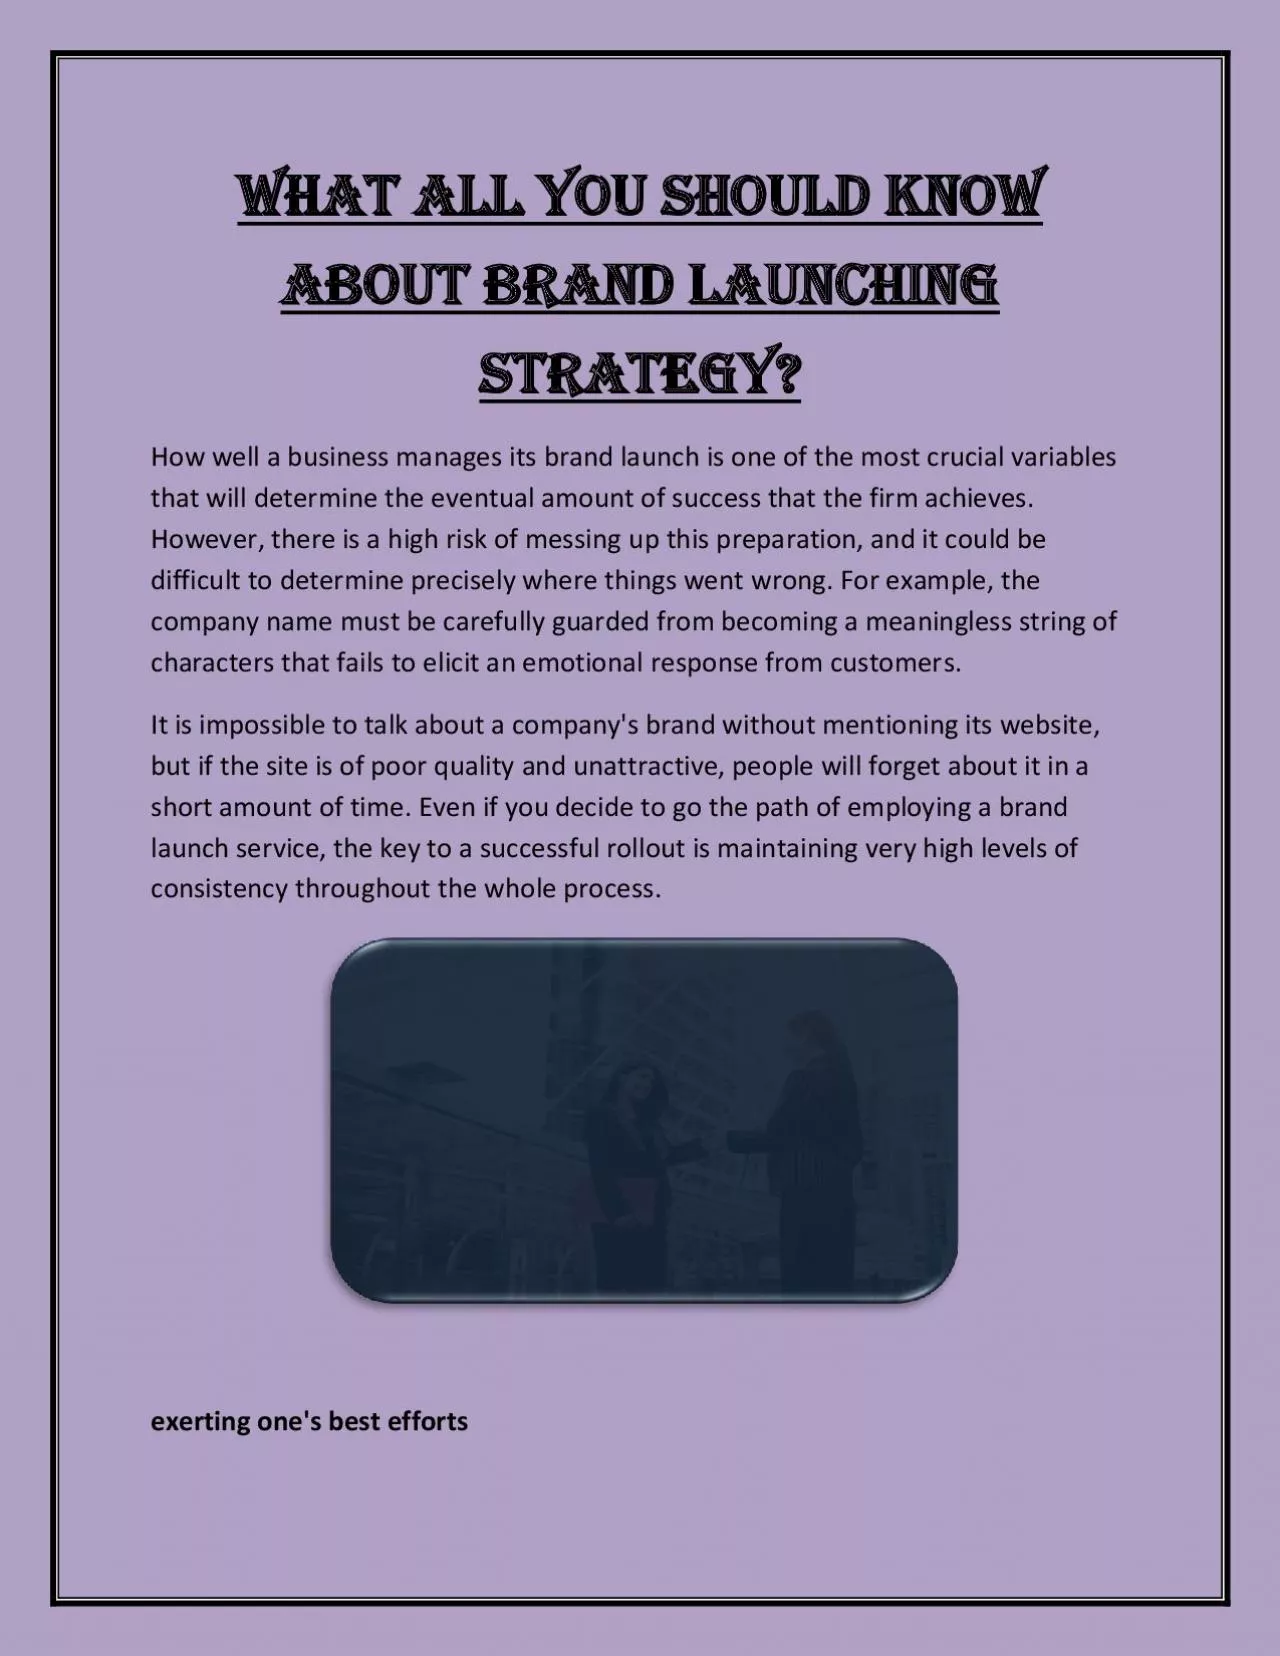 What all you should know about brand launching strategy?